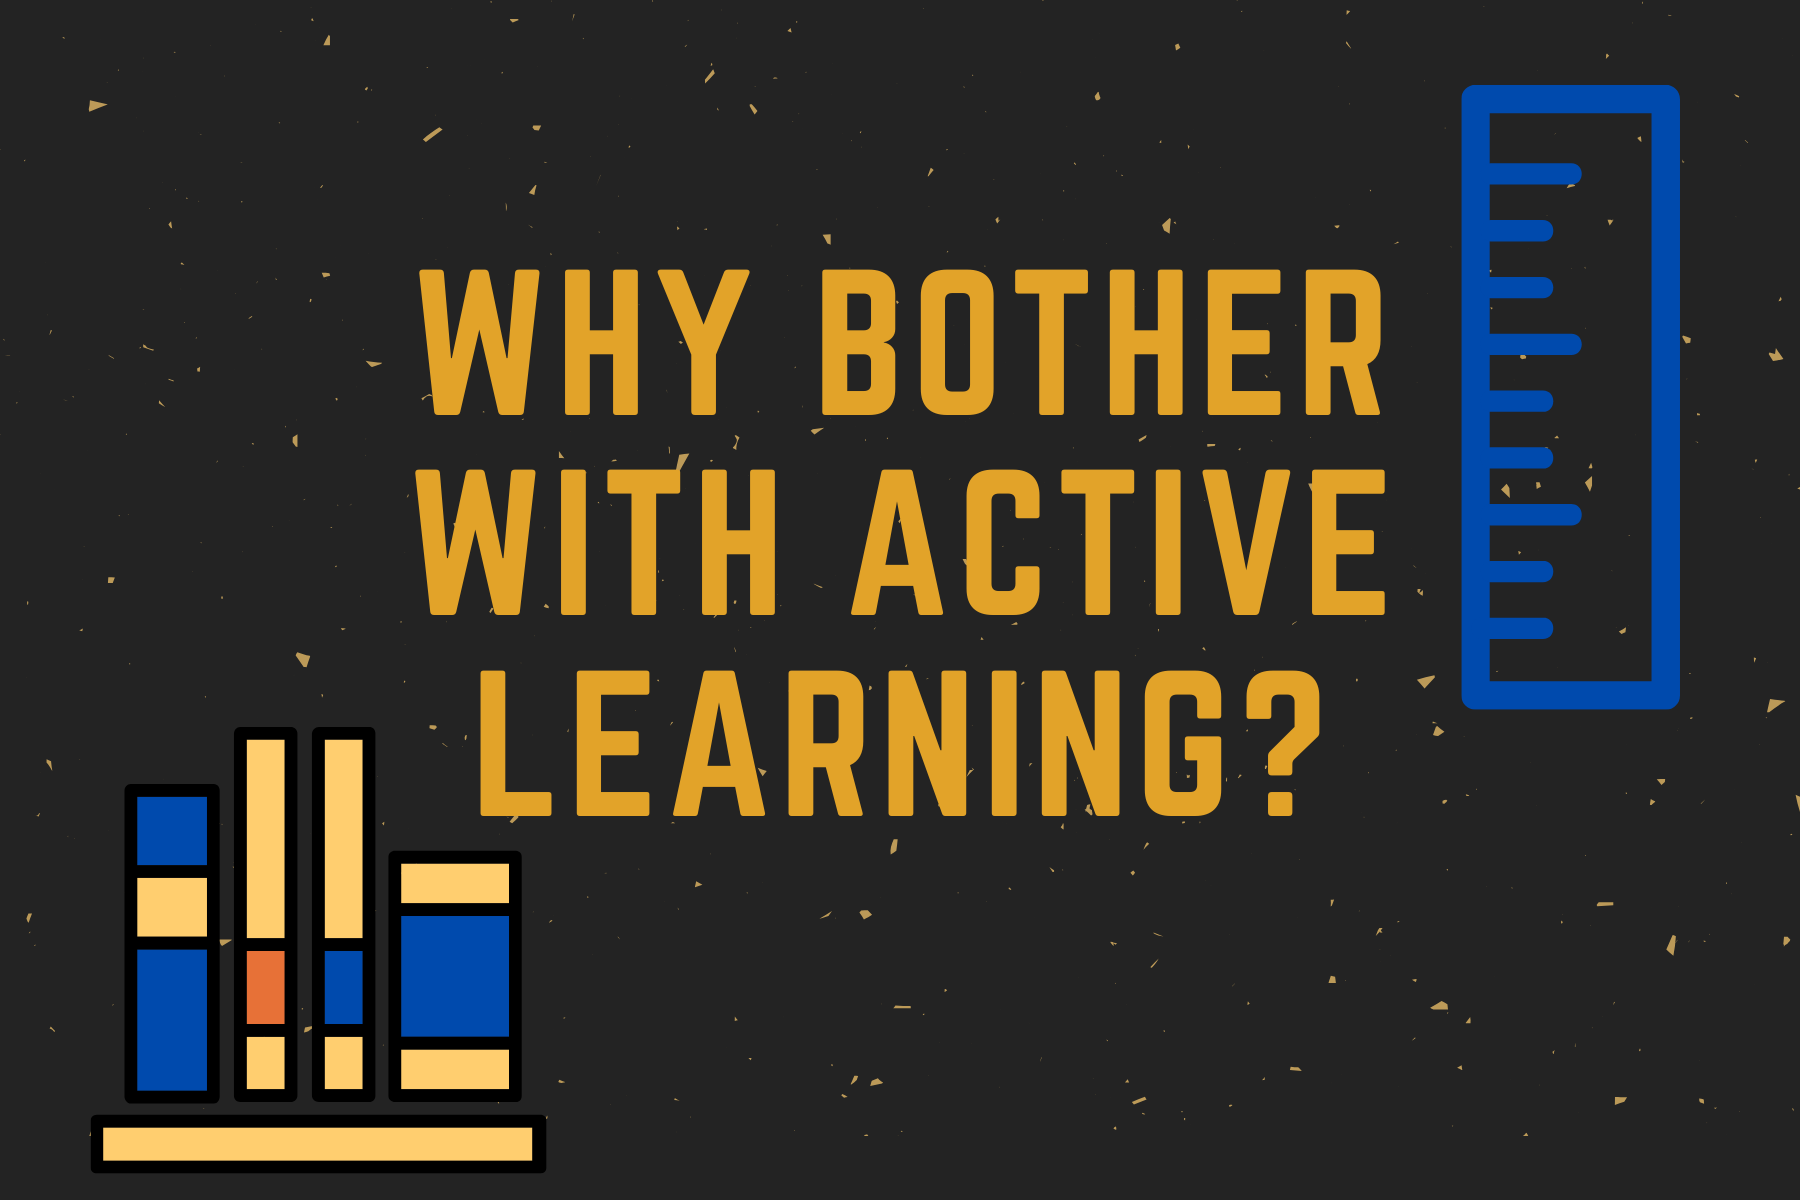 Why Bother with Active Learning?